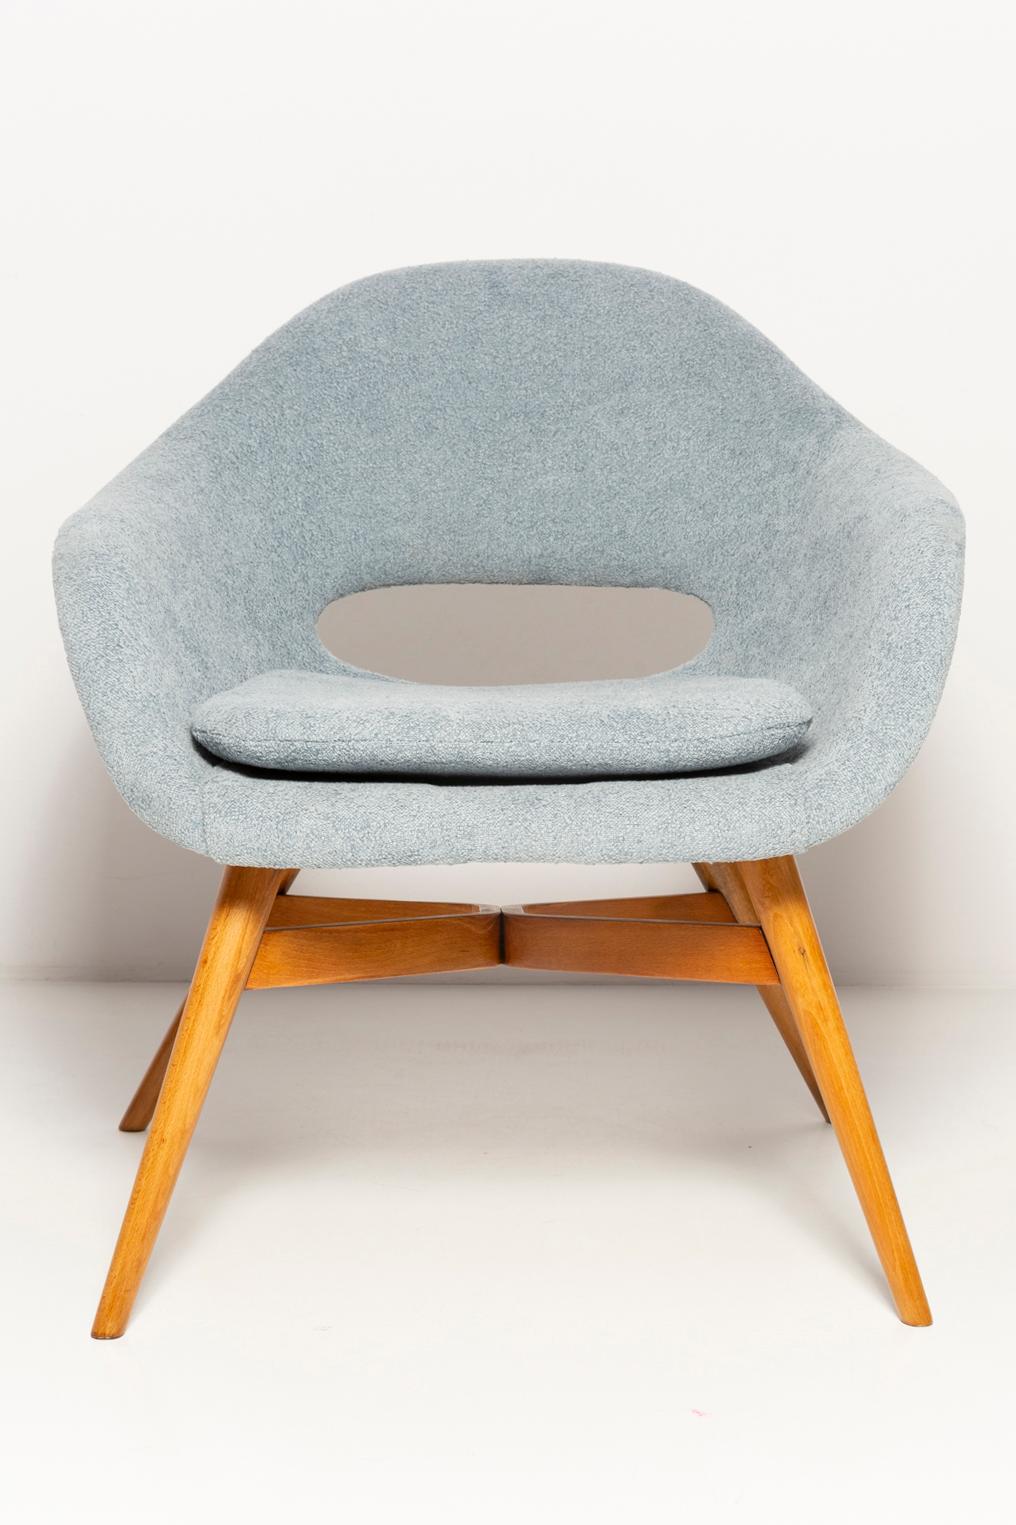 20th Century Set of Two Mid-Century Light Blue Shell Chairs, by Navratil, Czechoslovakia 1960 For Sale